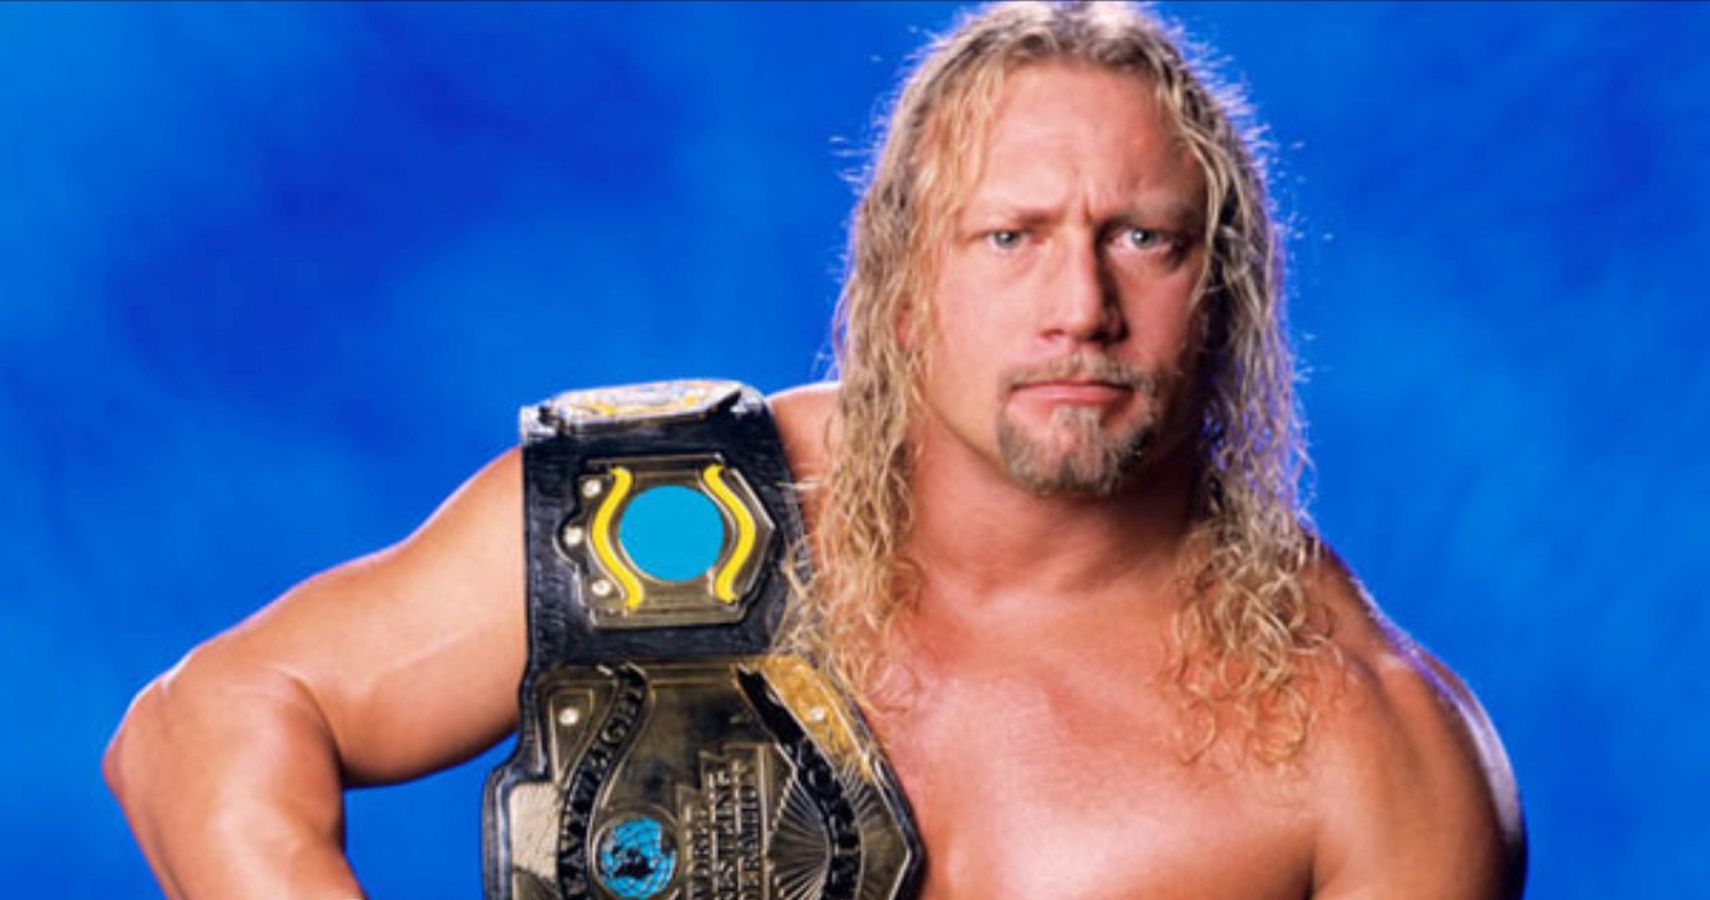 10 ECW Stars That Never Made it Big (But Should Have)